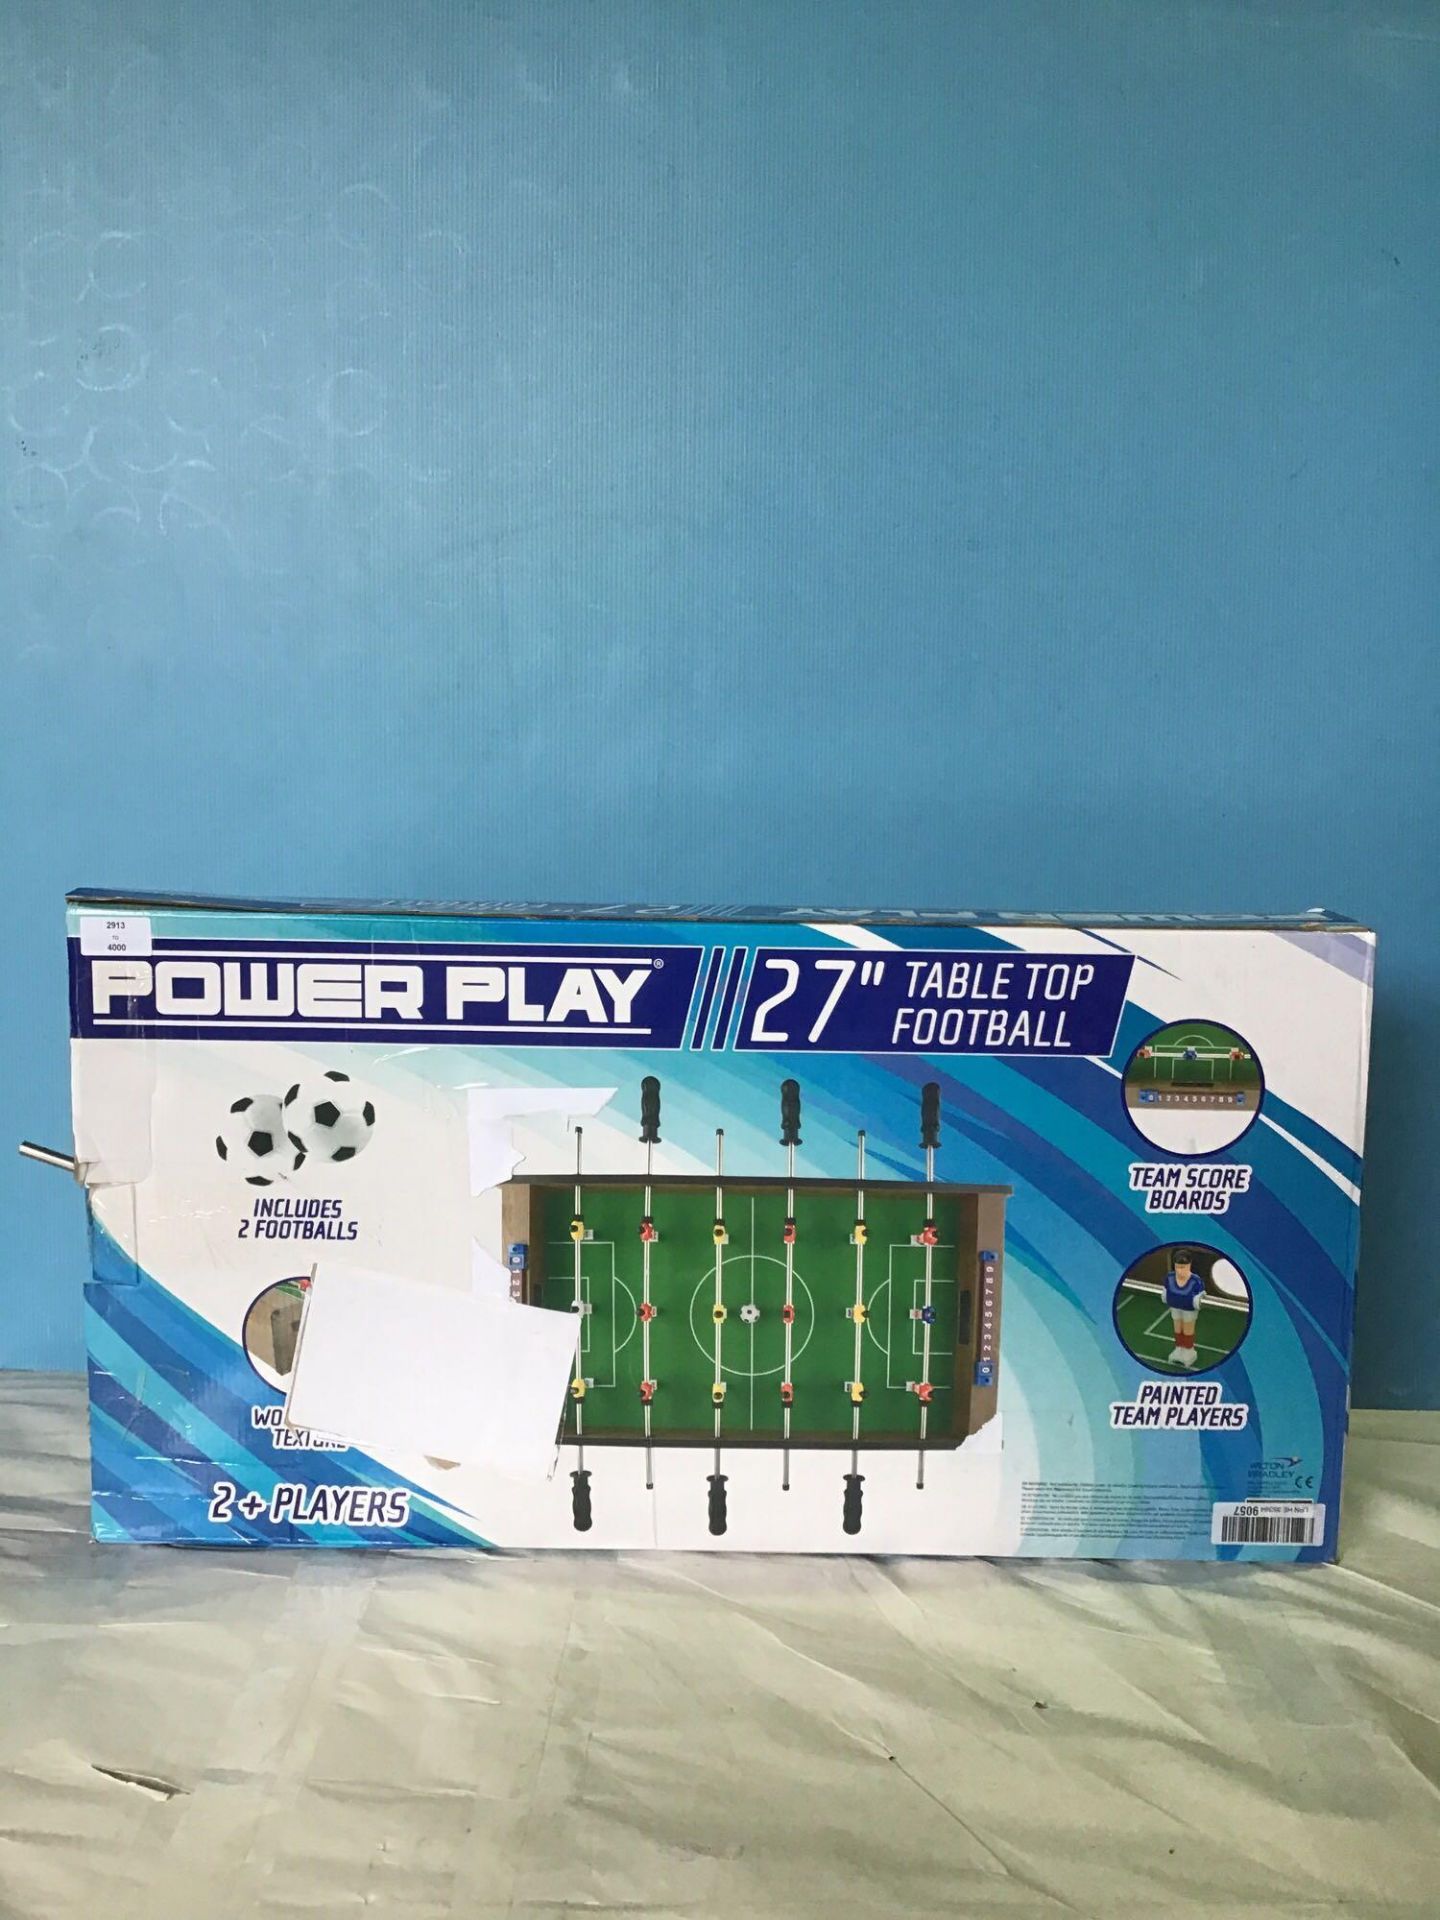 Power Play Table Top Football Game, 27 Inch - Image 3 of 5